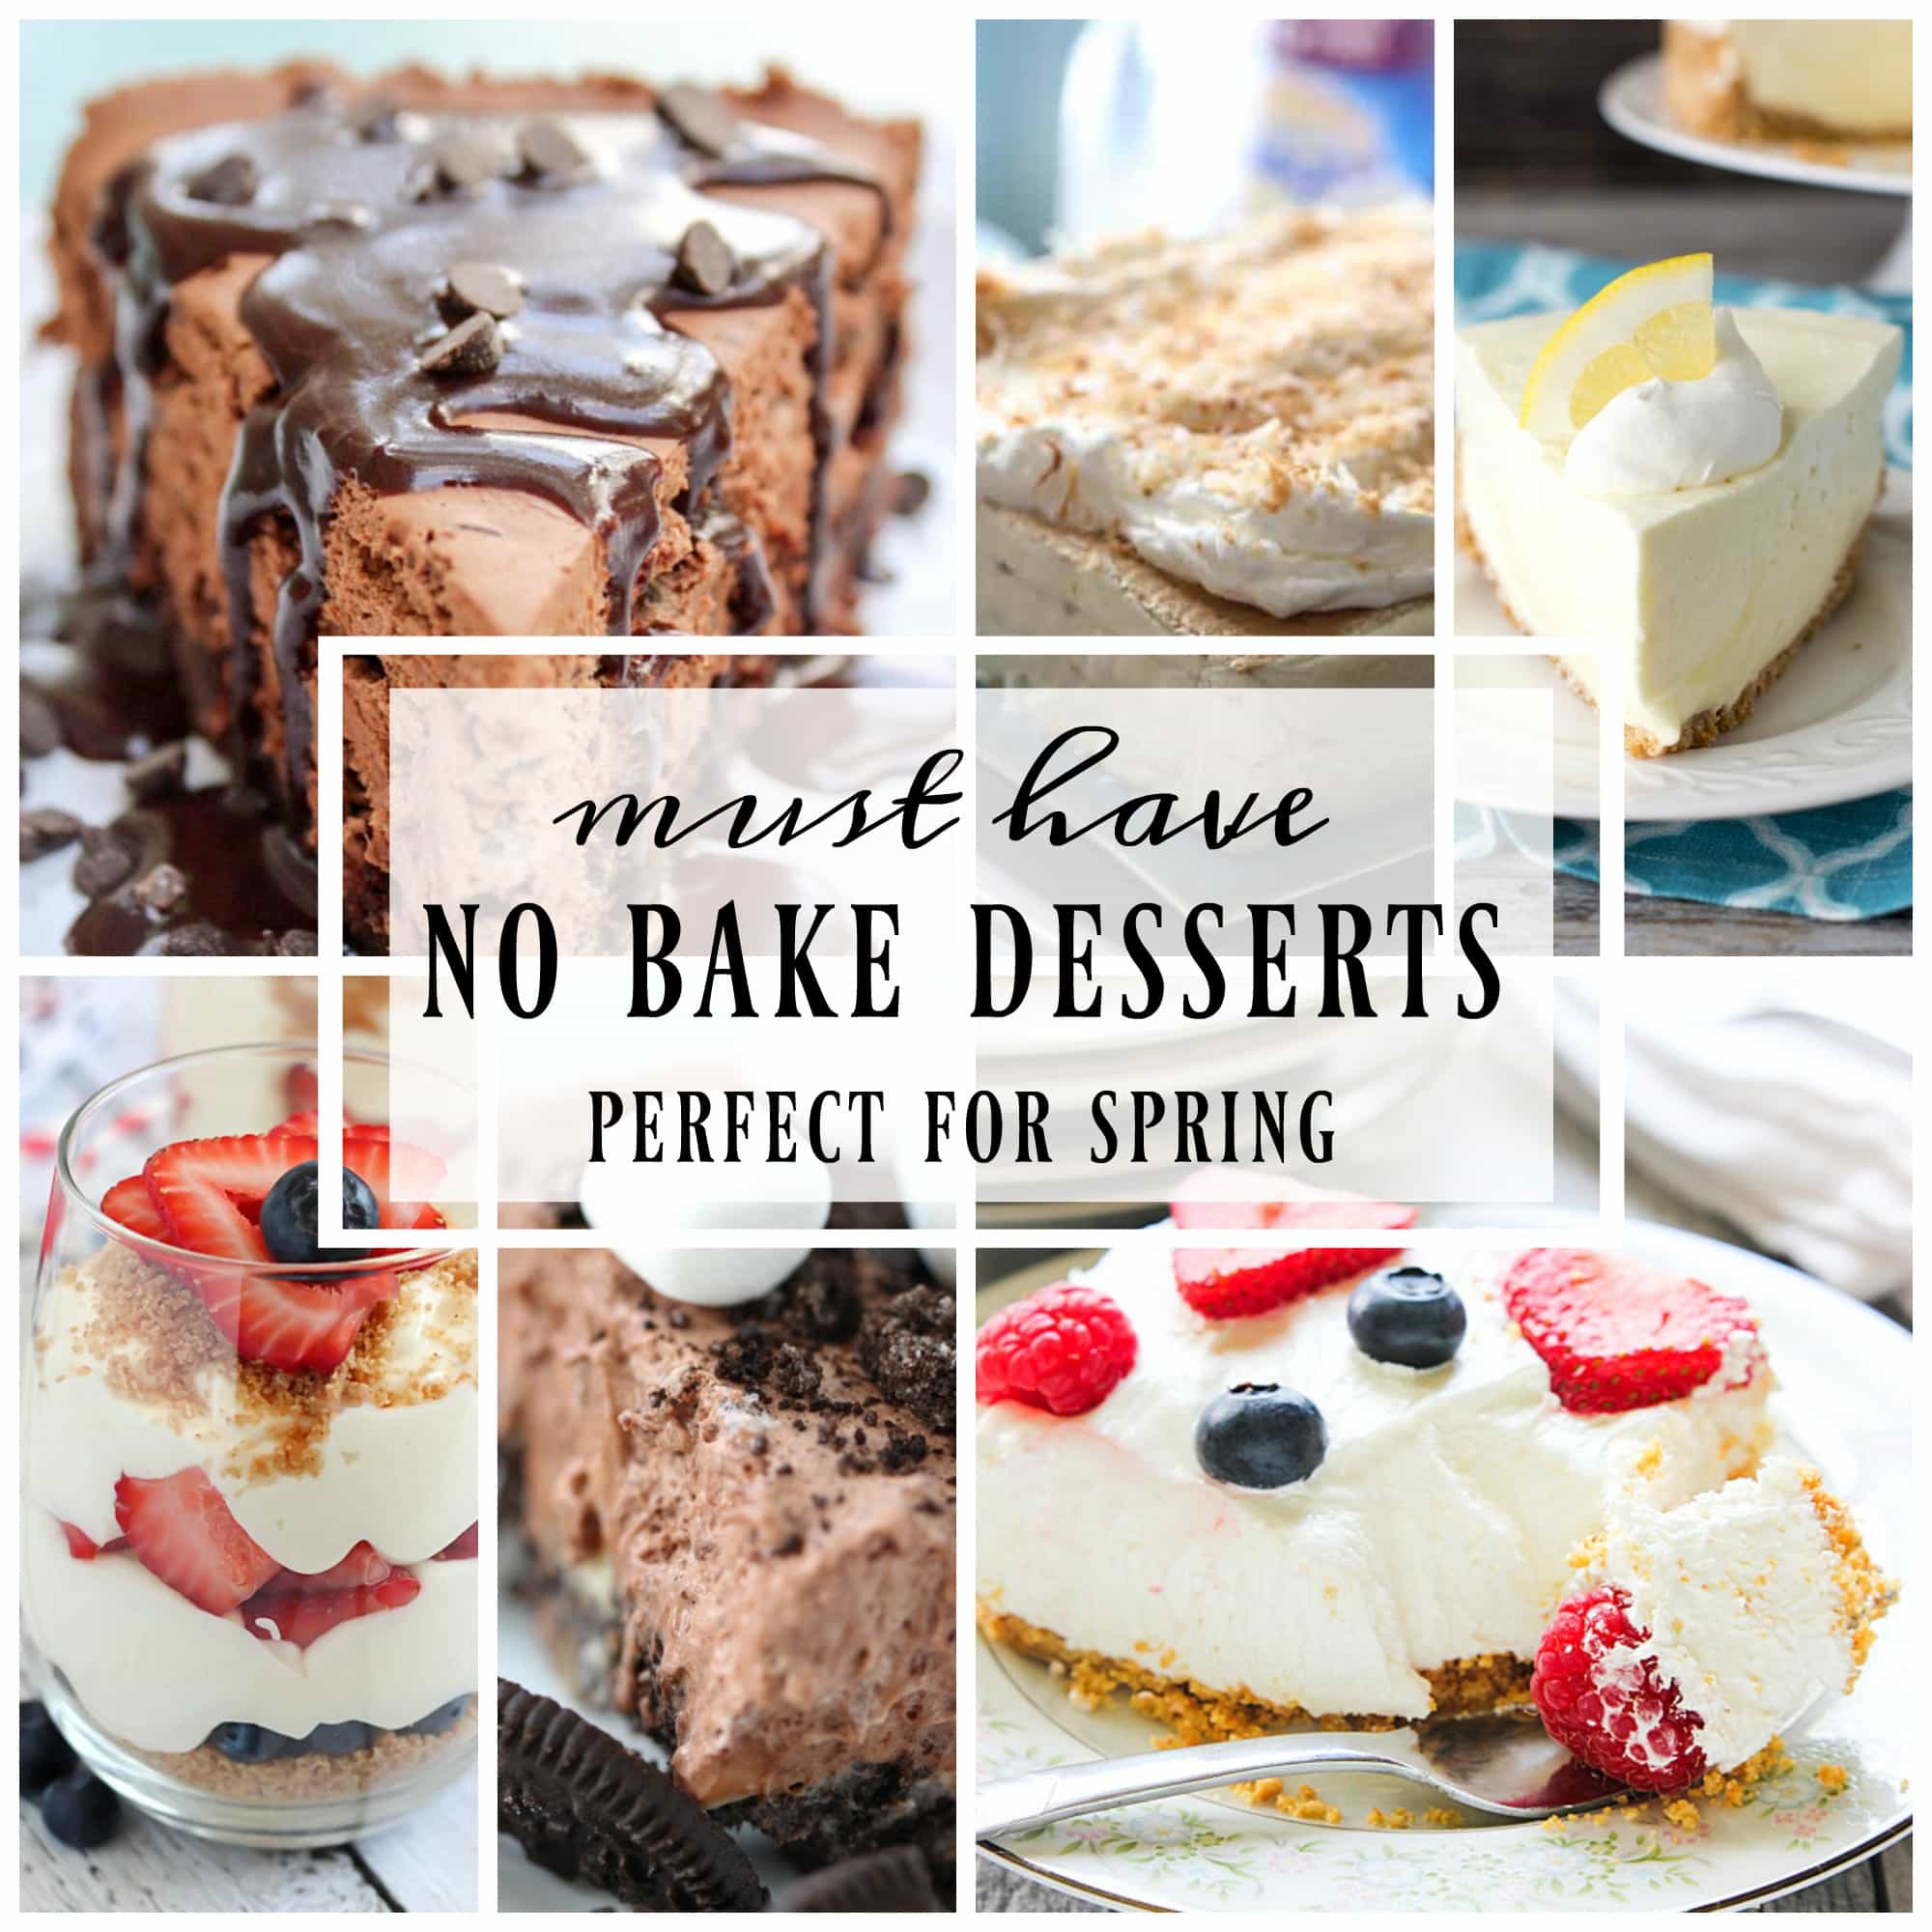 When the weather gets warmer, no bake desserts are a must!